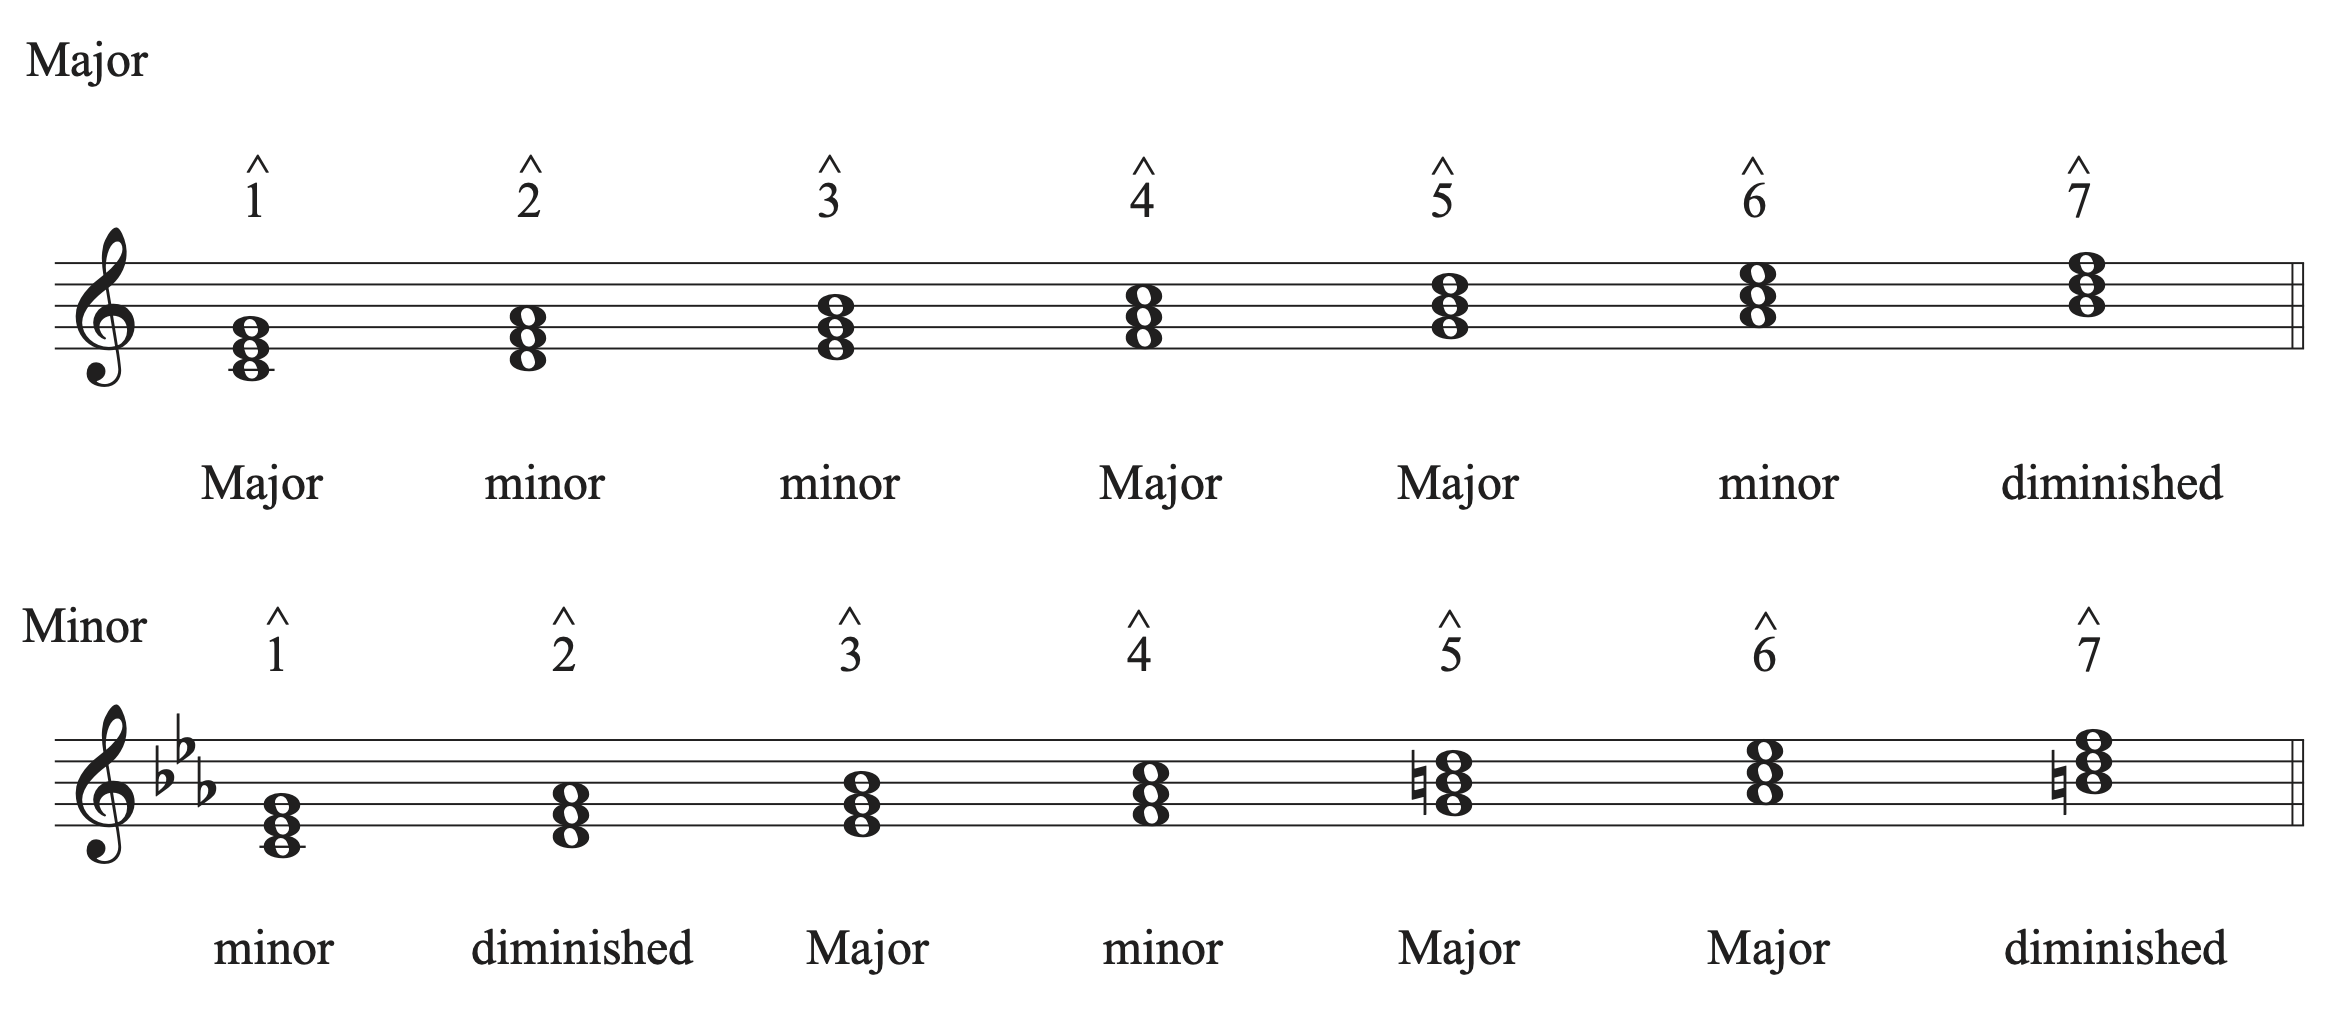 Chart showing the diatonic triads built on each scale degree of a major and minor key.